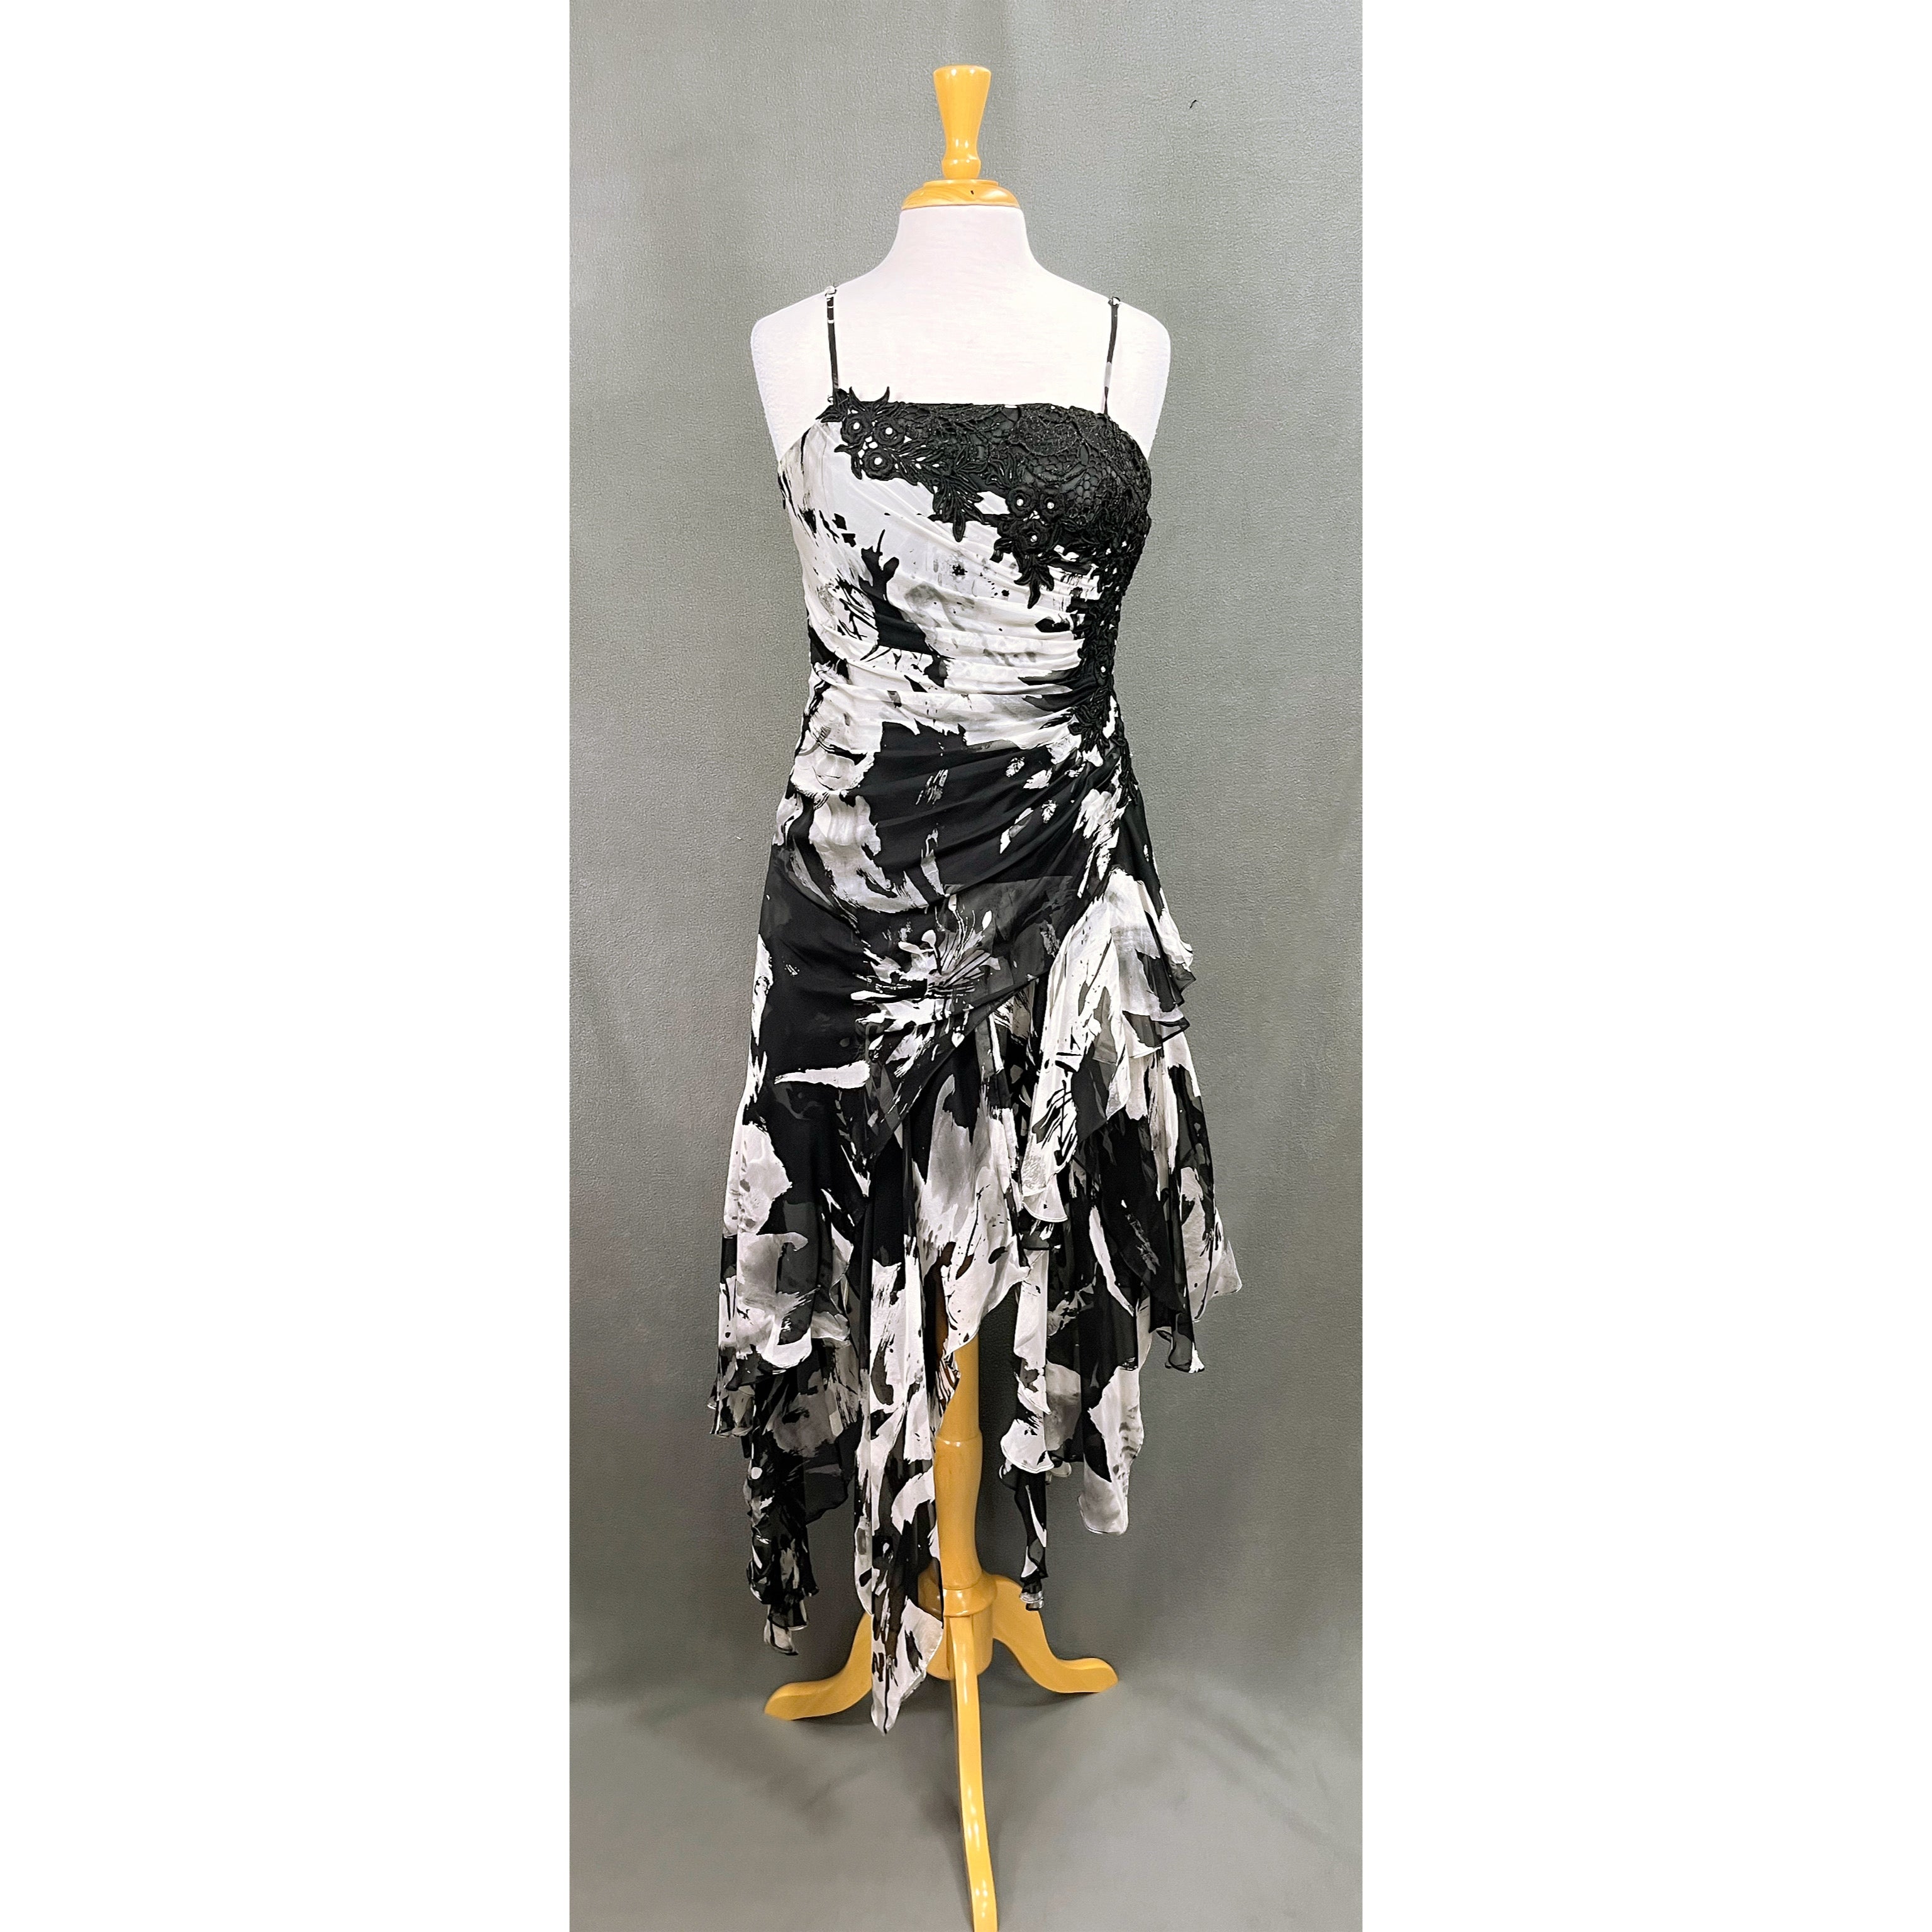 Cartise black and white dress, size 10